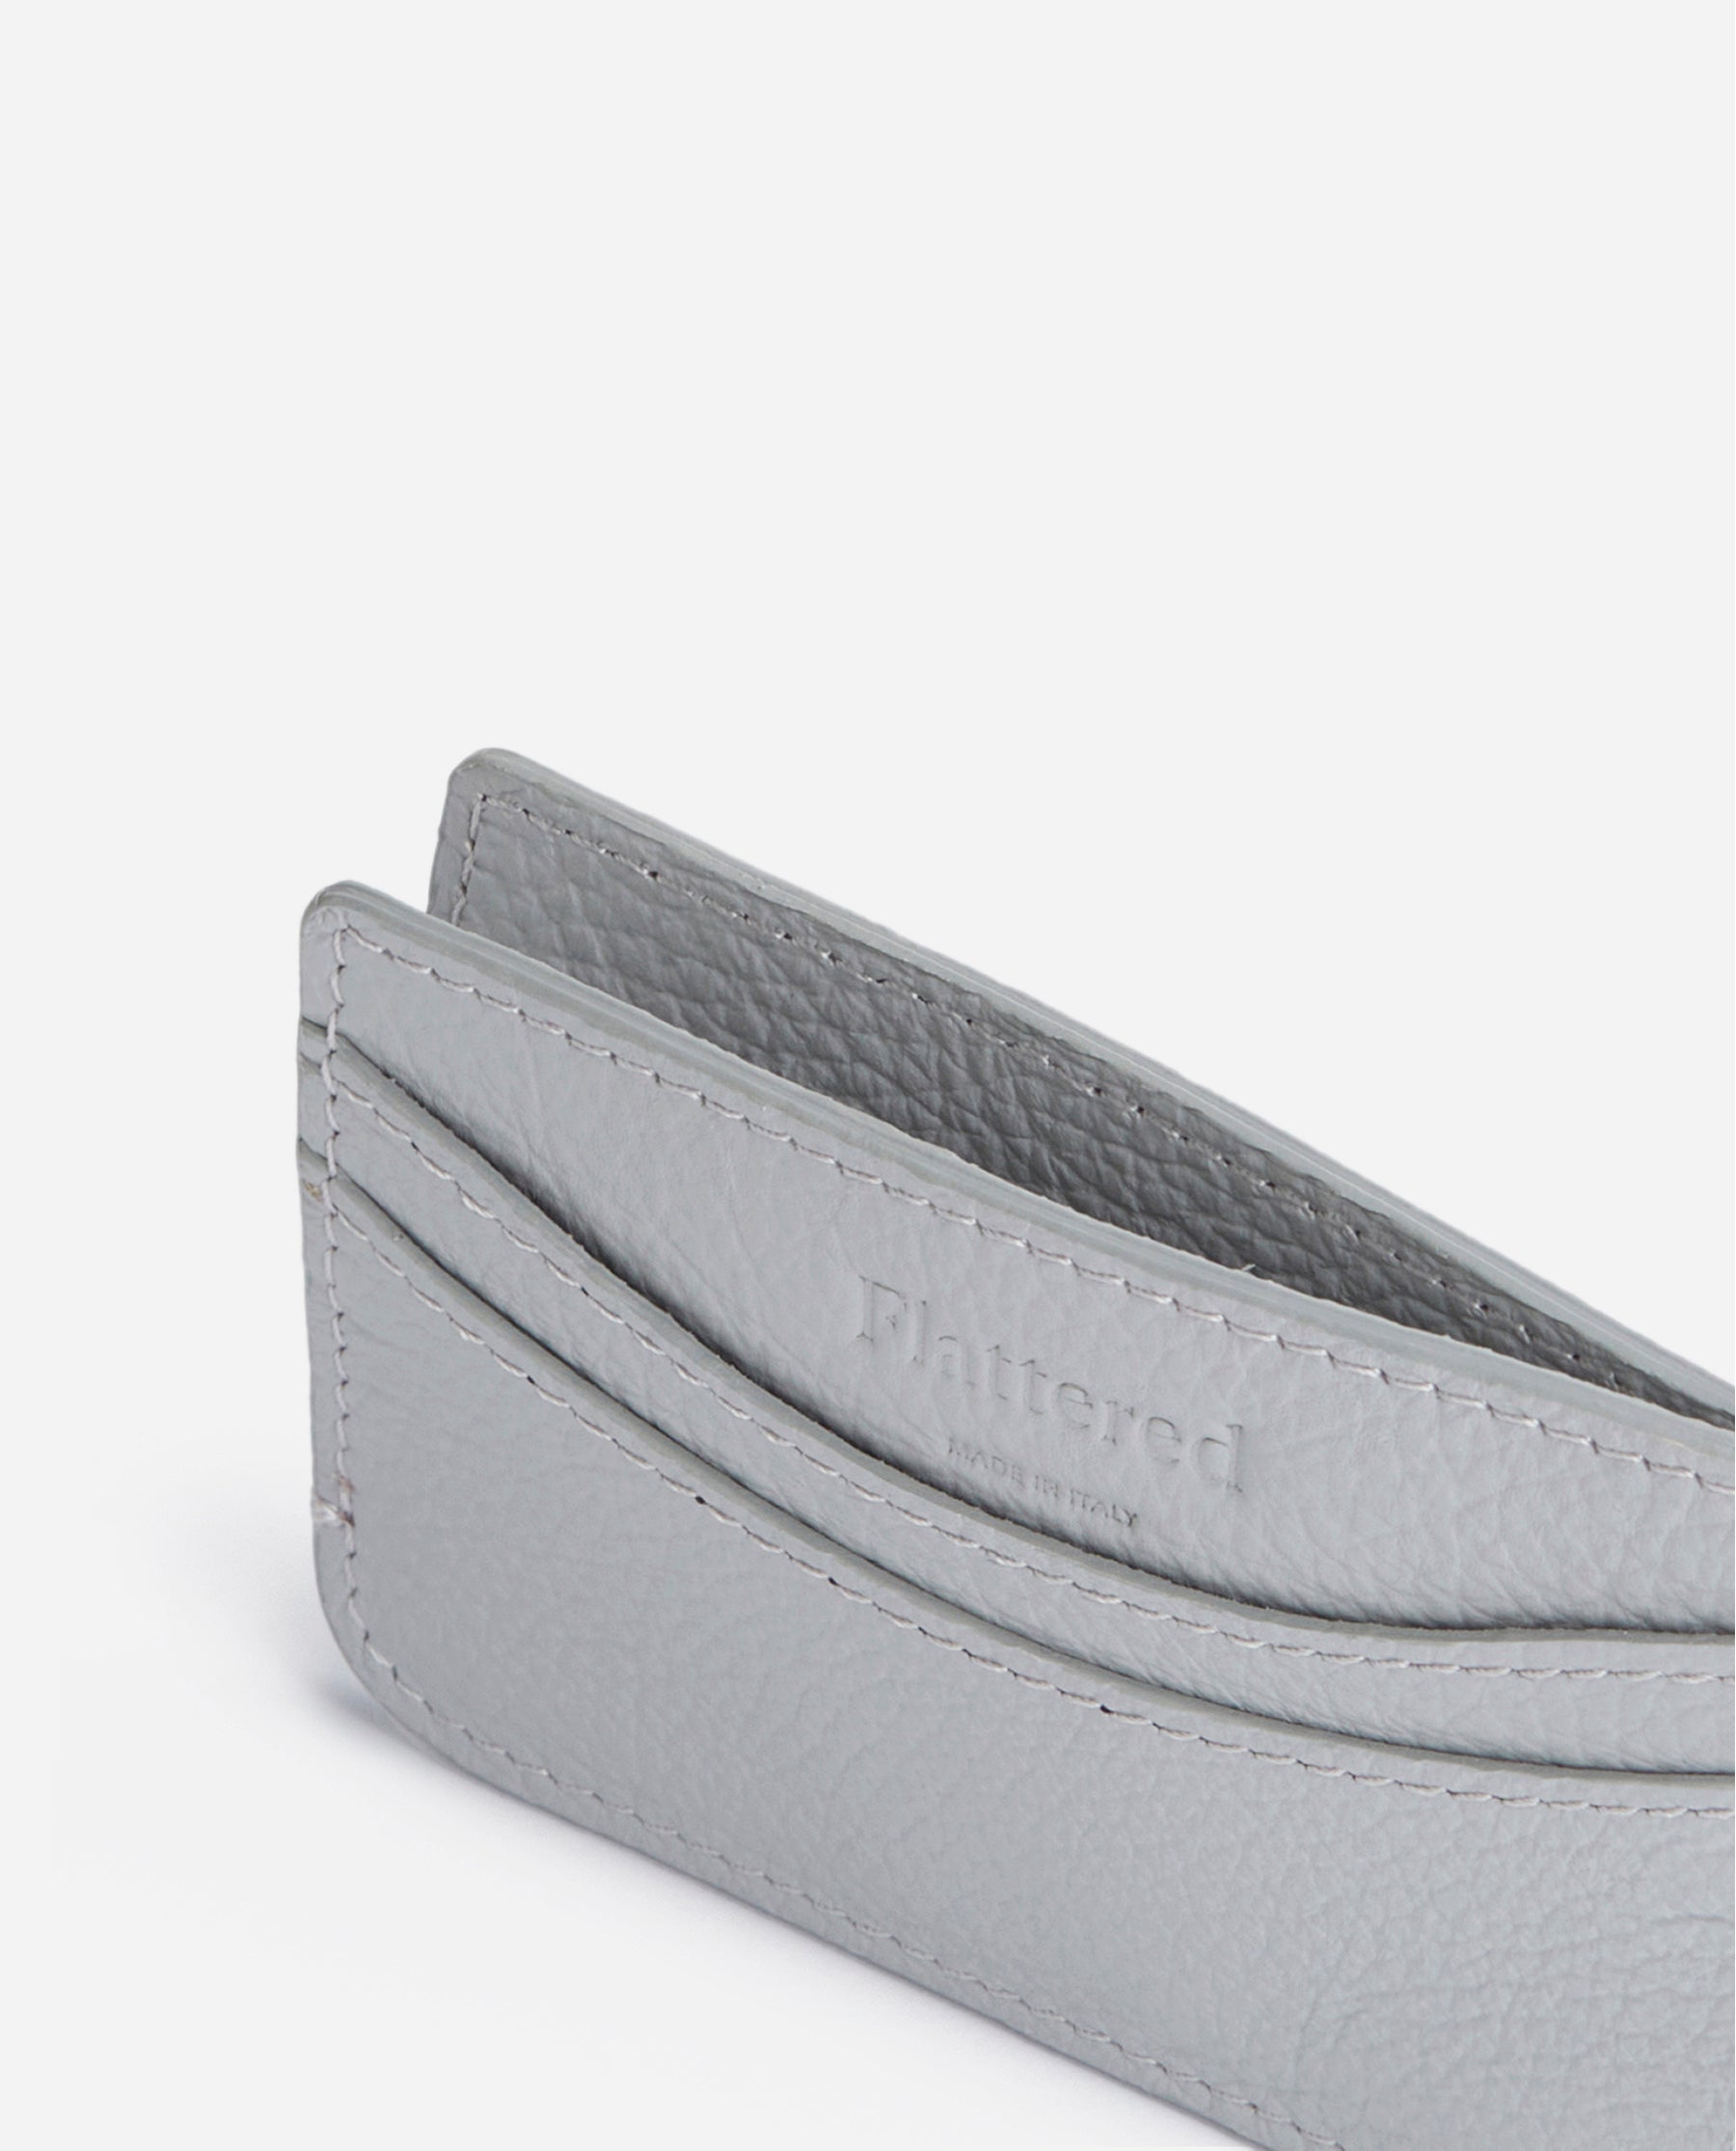 Flattered-OUTLET-SALE-Bonnie-Cardholder-Leather-Grey-Taschen-Onesize-Grey-Leather-ARCHIVE-COLLECTION-2.jpg